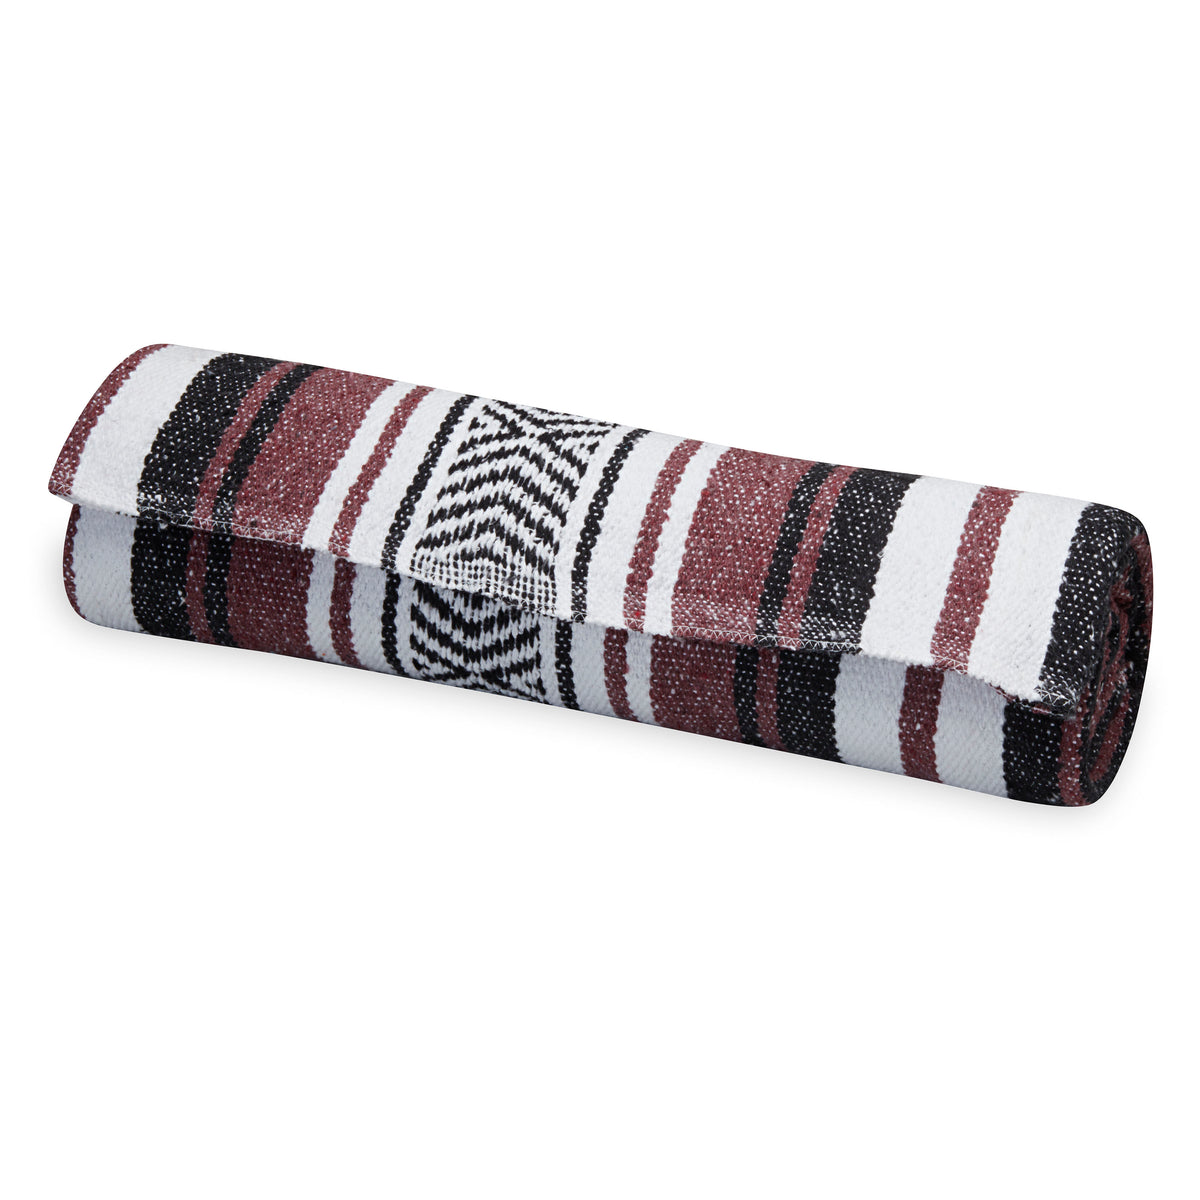 Traditional Mexican Woven Blanket Burgundy/White/Black rolled up